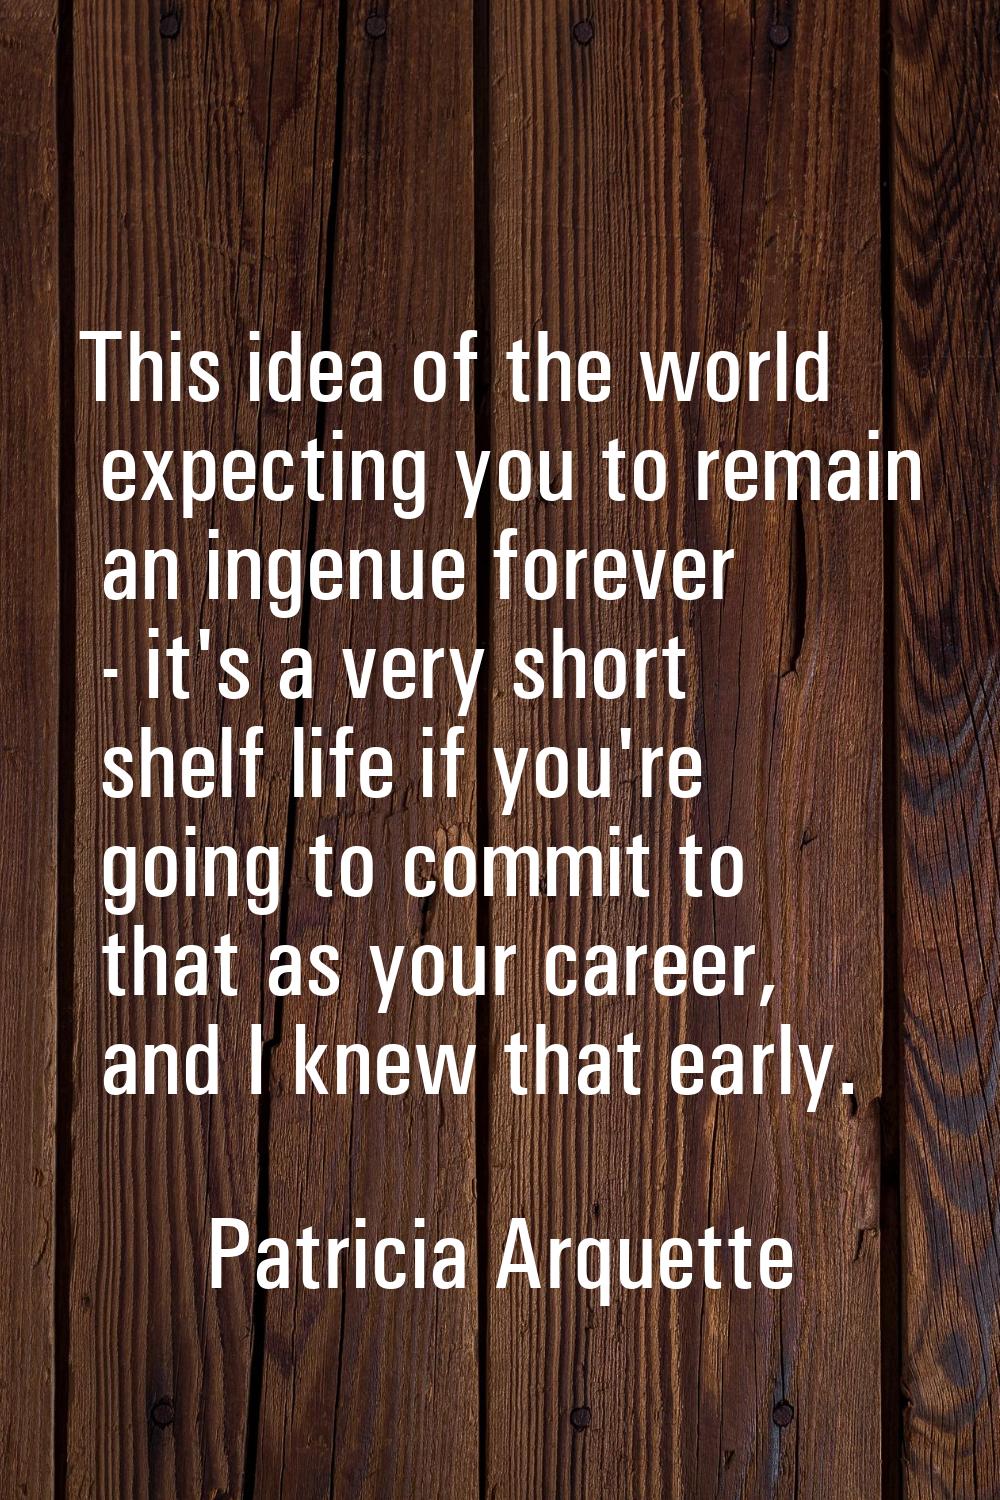 This idea of the world expecting you to remain an ingenue forever - it's a very short shelf life if